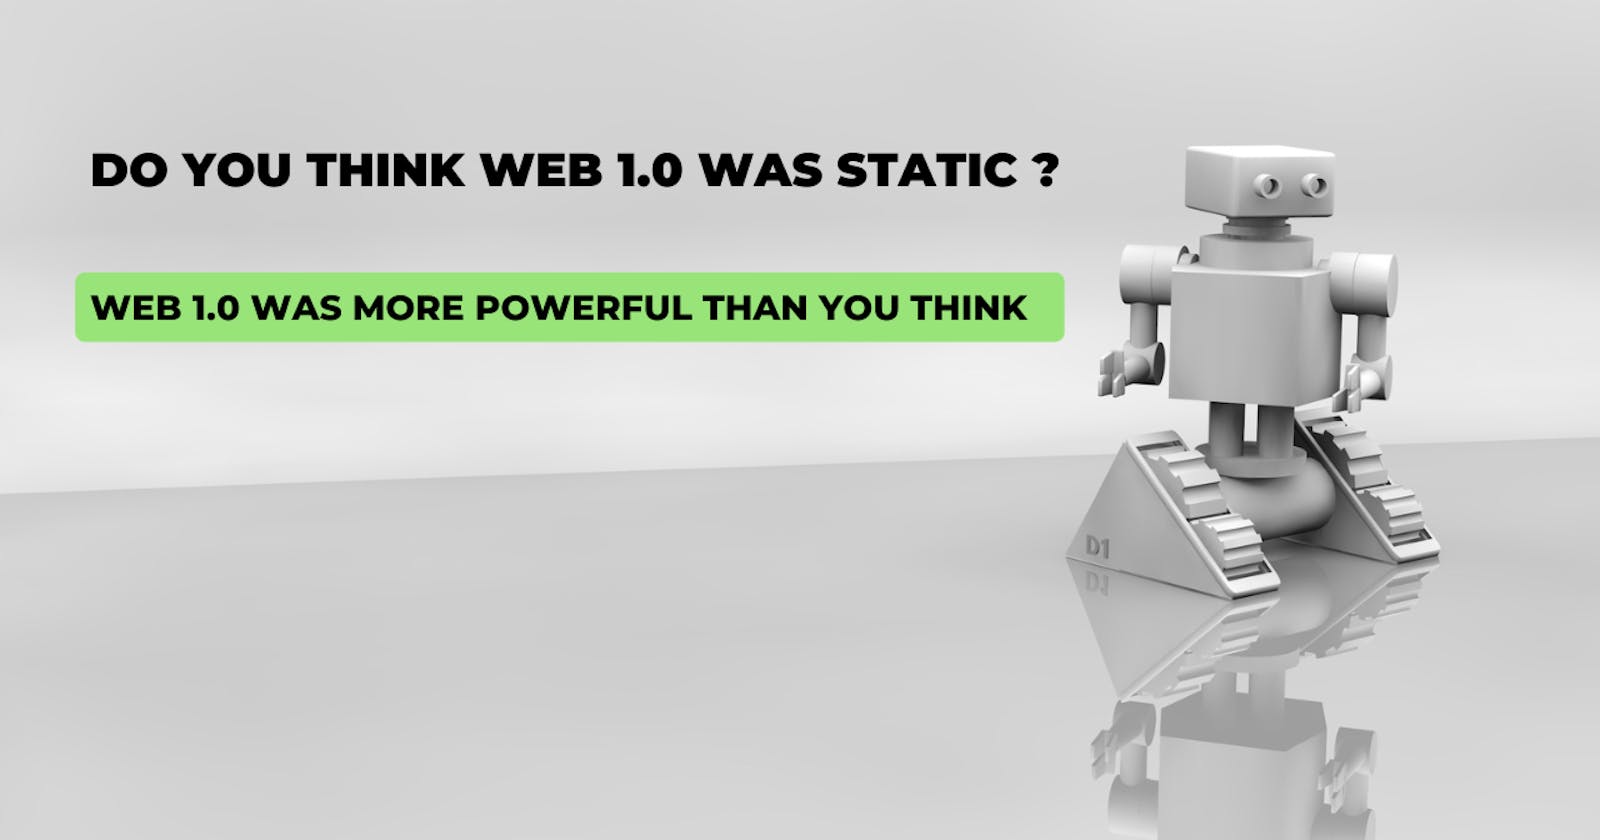 Web 1.0 was way more powerful than you know.